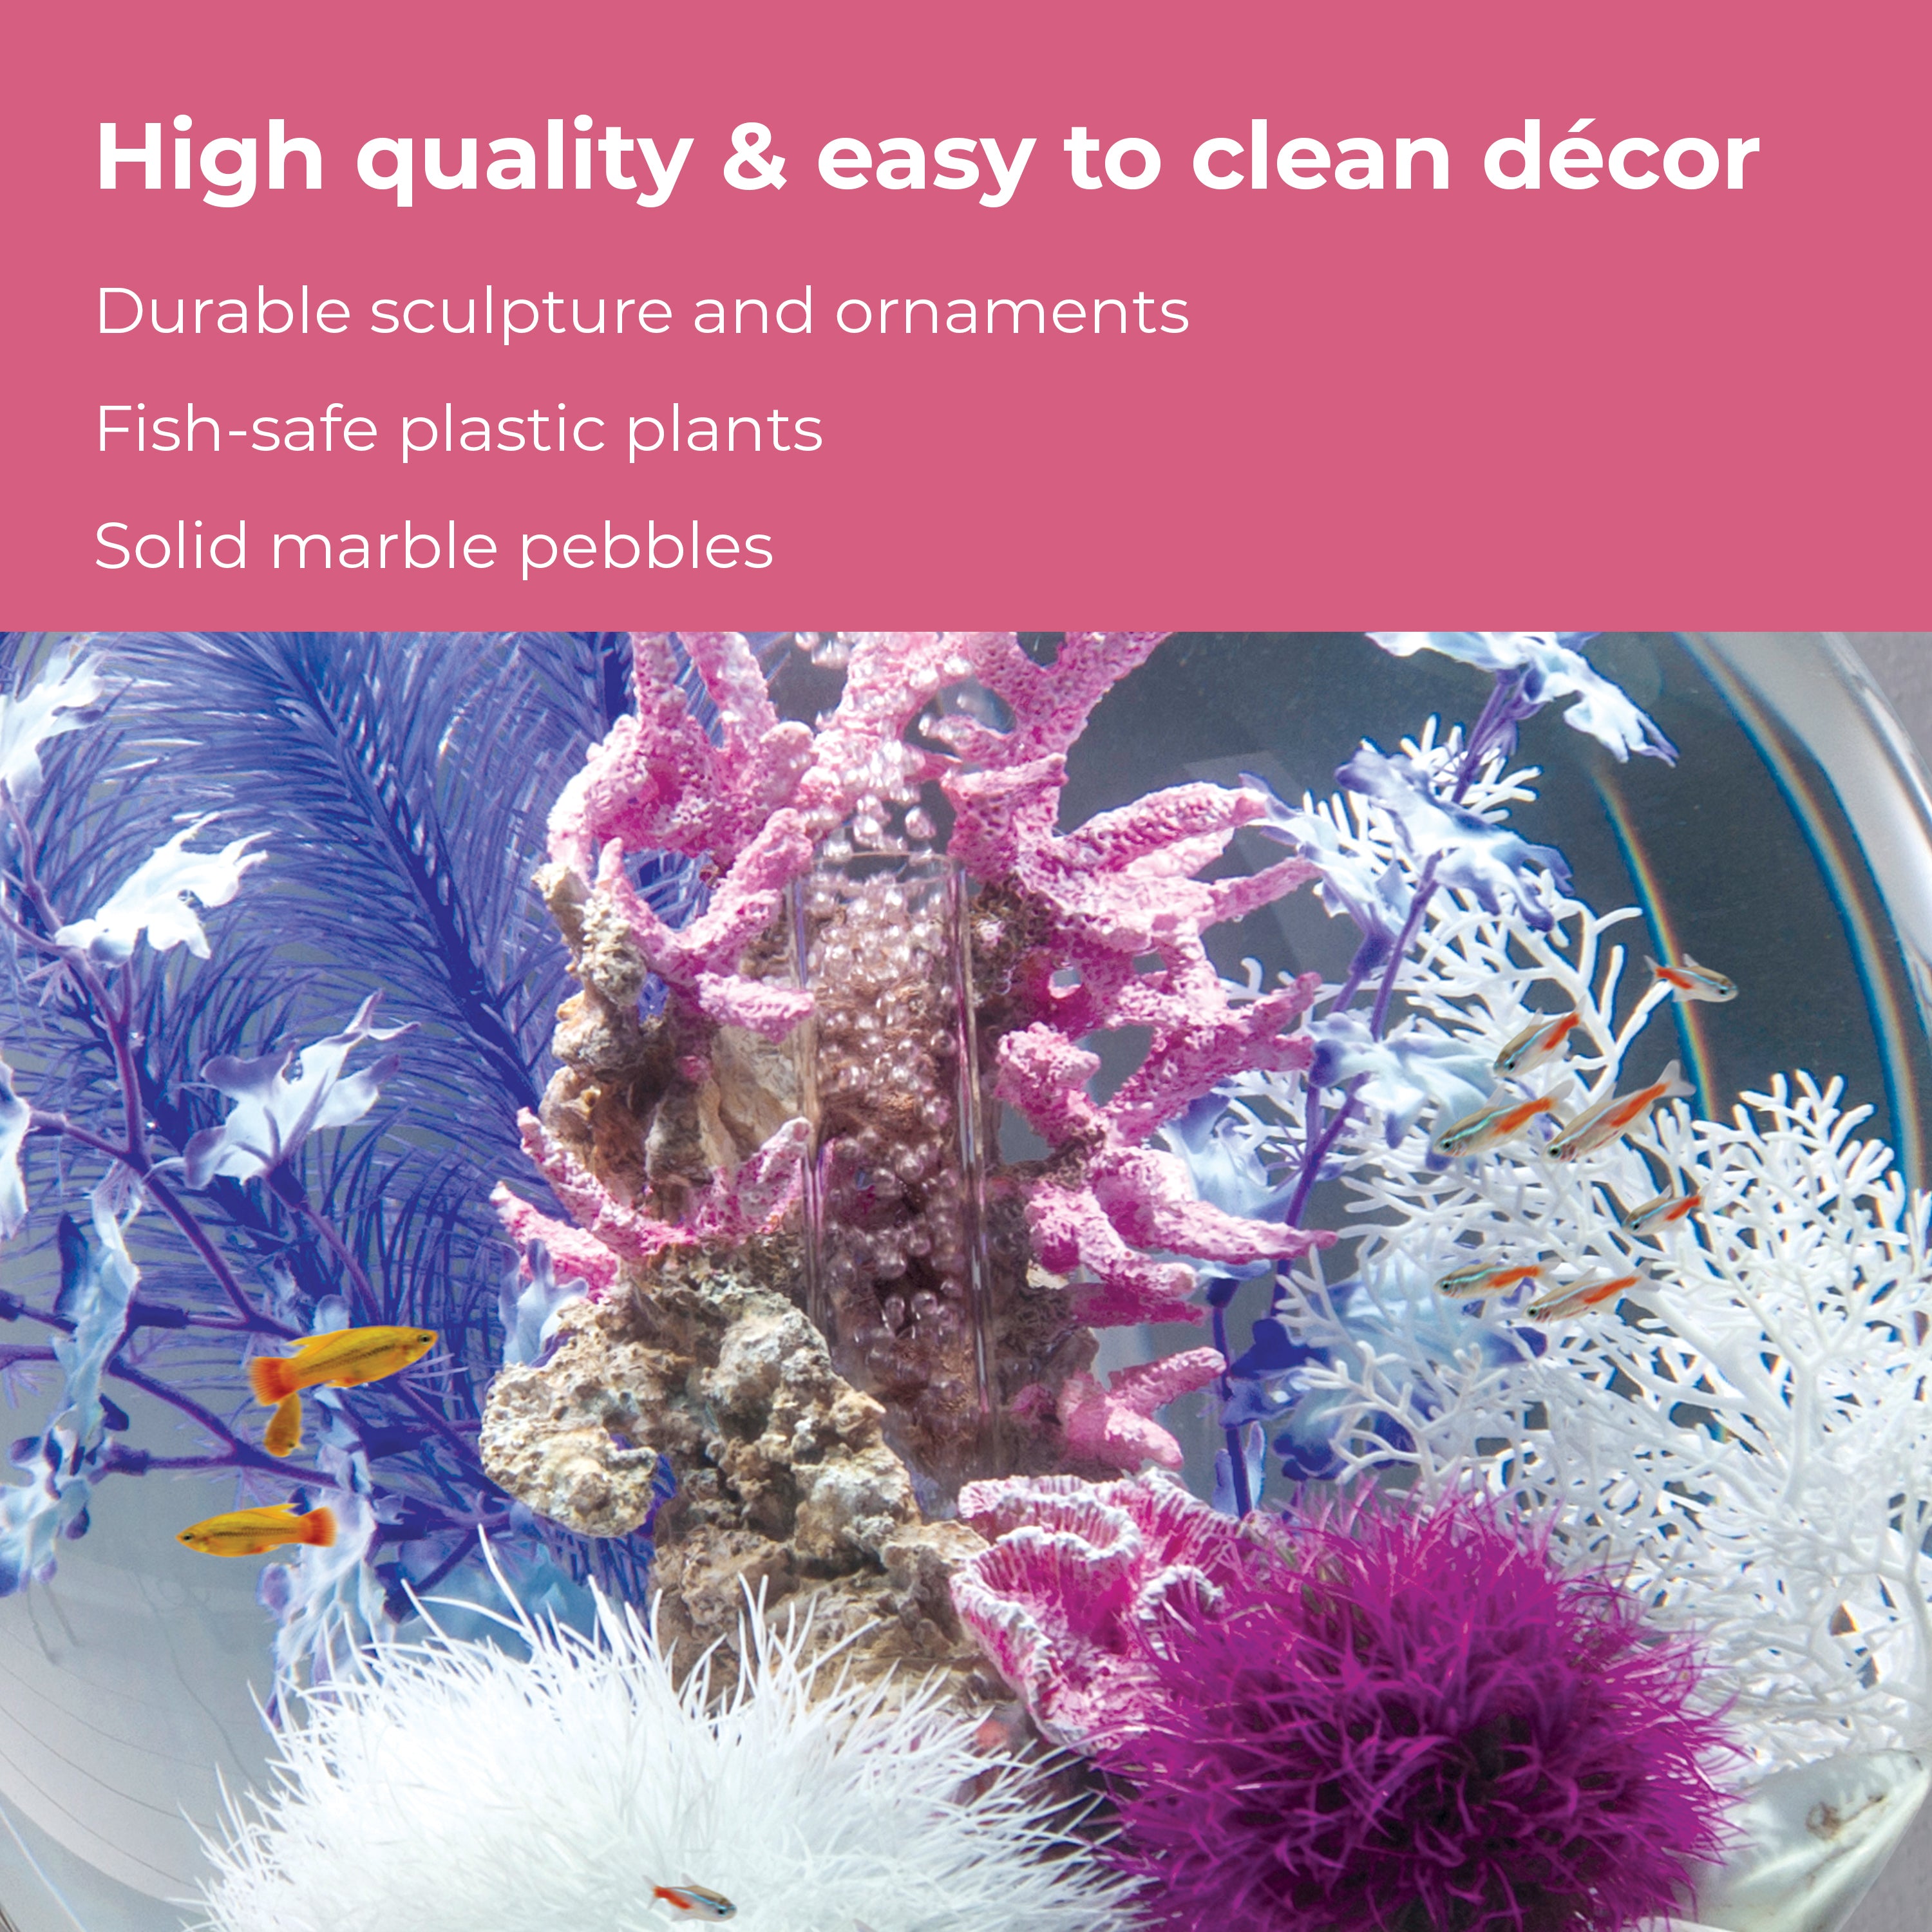 Pink Ocean Décor Set -  High quality & easy to clean decor